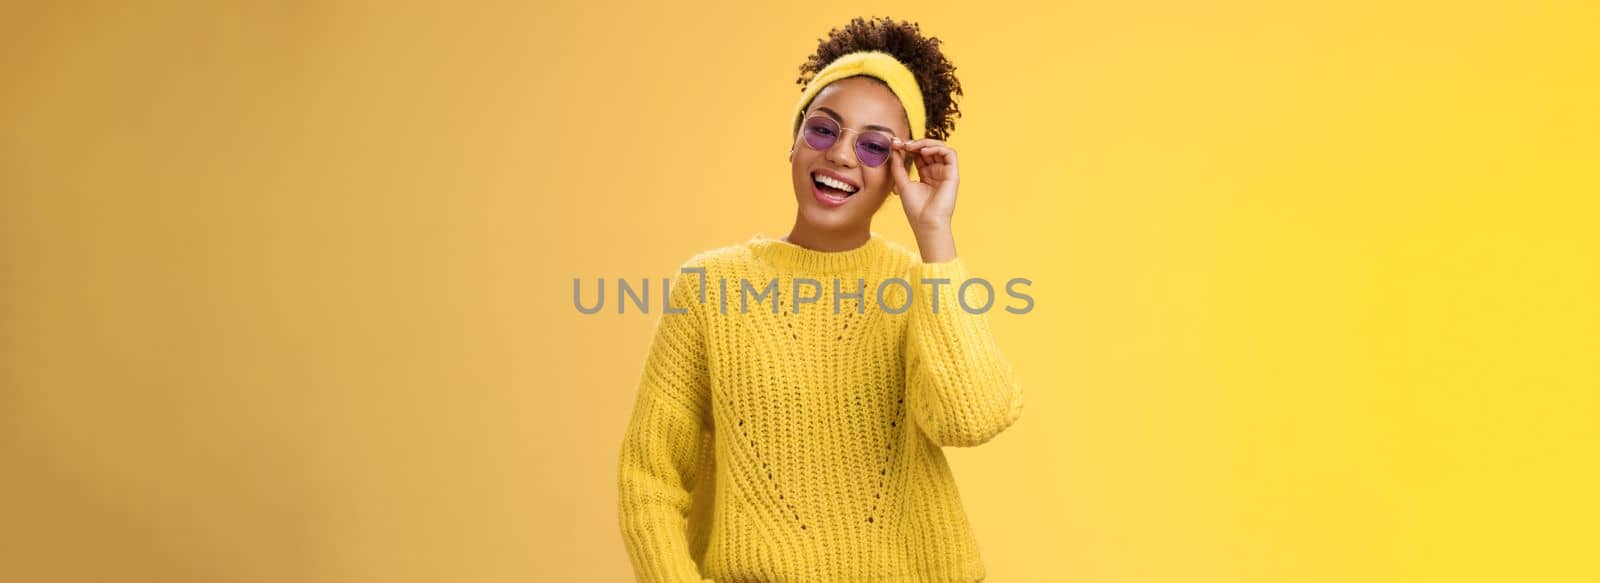 Stylish chill confident modern millennial teenage girl sweater headband blue sunglasses touching glasses frames smiling broadly assertive self-assured look grinning delighted hold hand pocket.